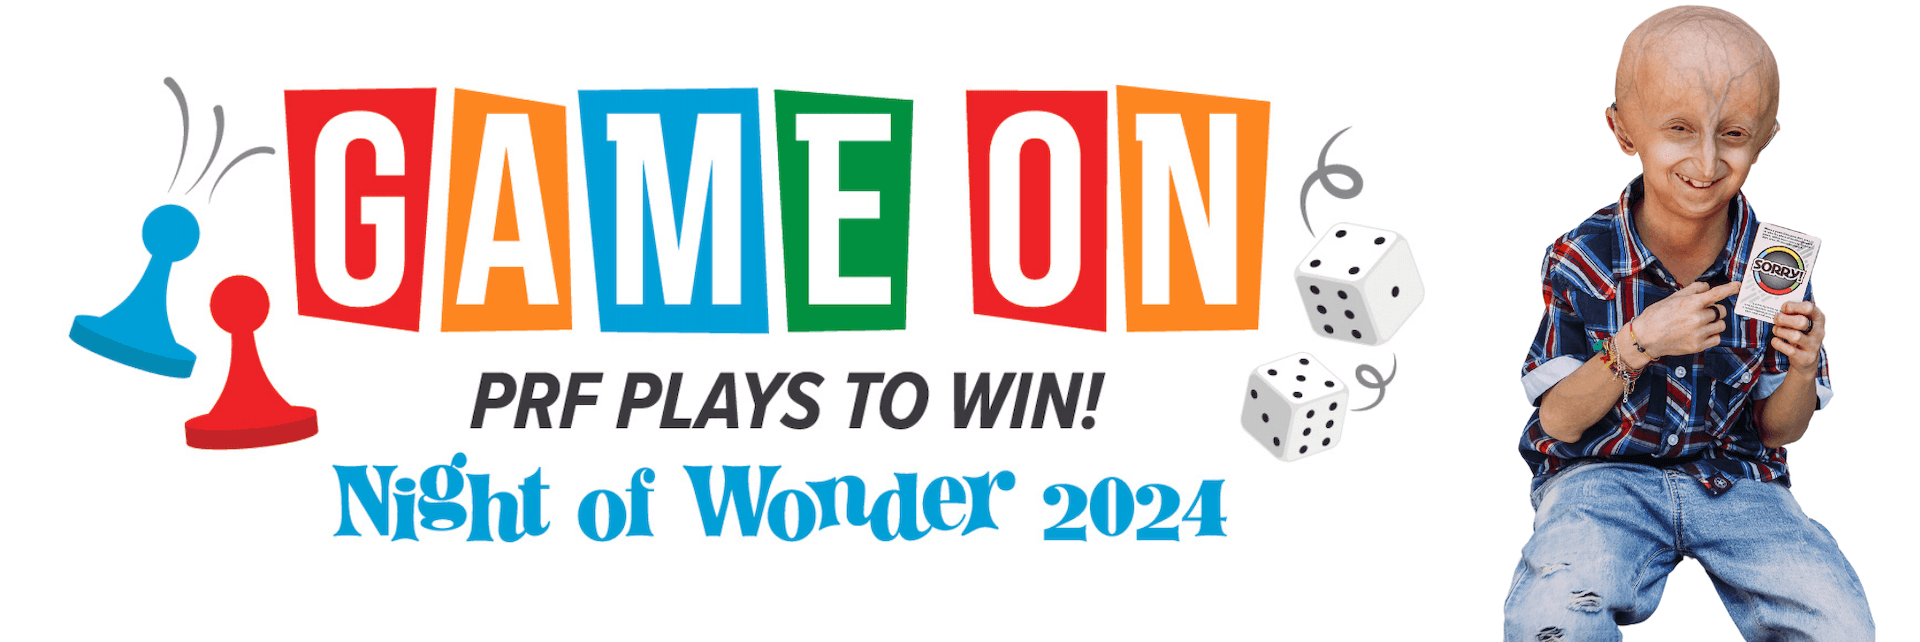 Game On. PRF Plays To Win! Night of Wonder 2024.